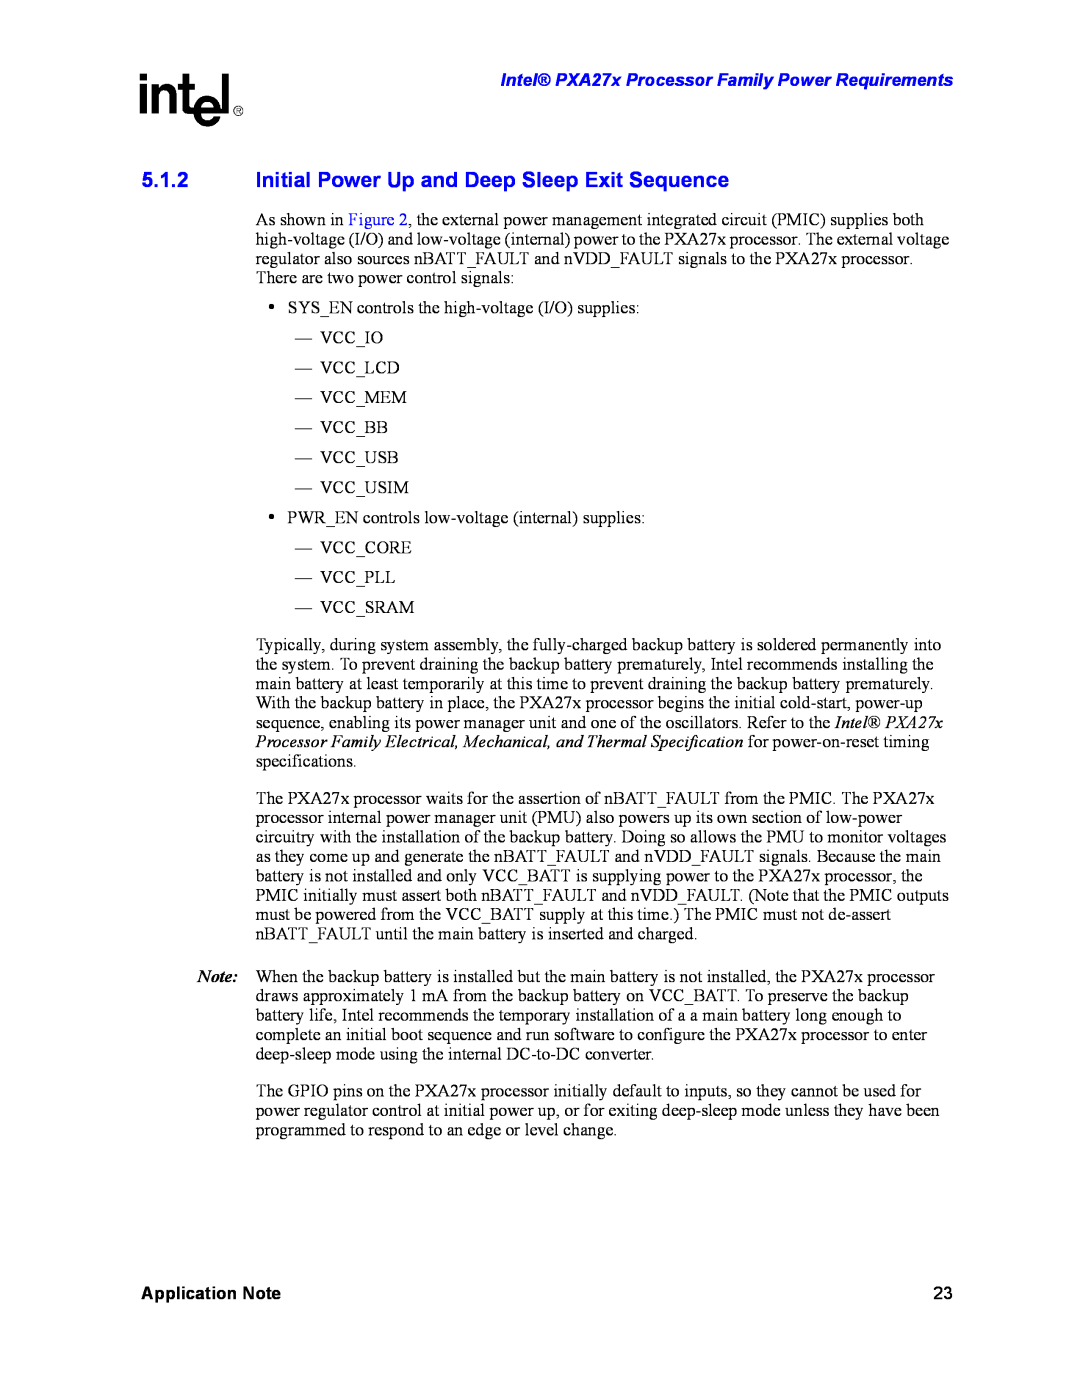 Intel PXA27X manual Initial Power Up and Deep Sleep Exit Sequence, Intel PXA27x Processor Family Power Requirements 